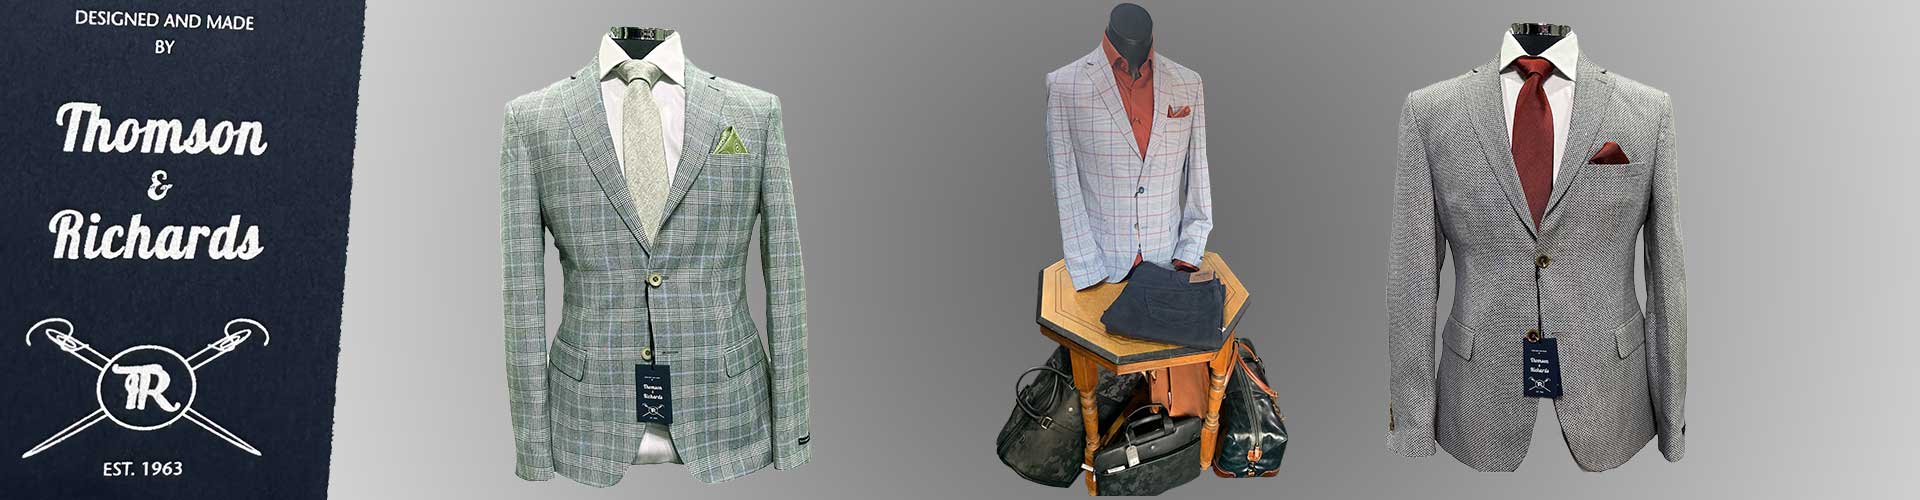 Thomson & Richard now showing at Harrys for Menswear